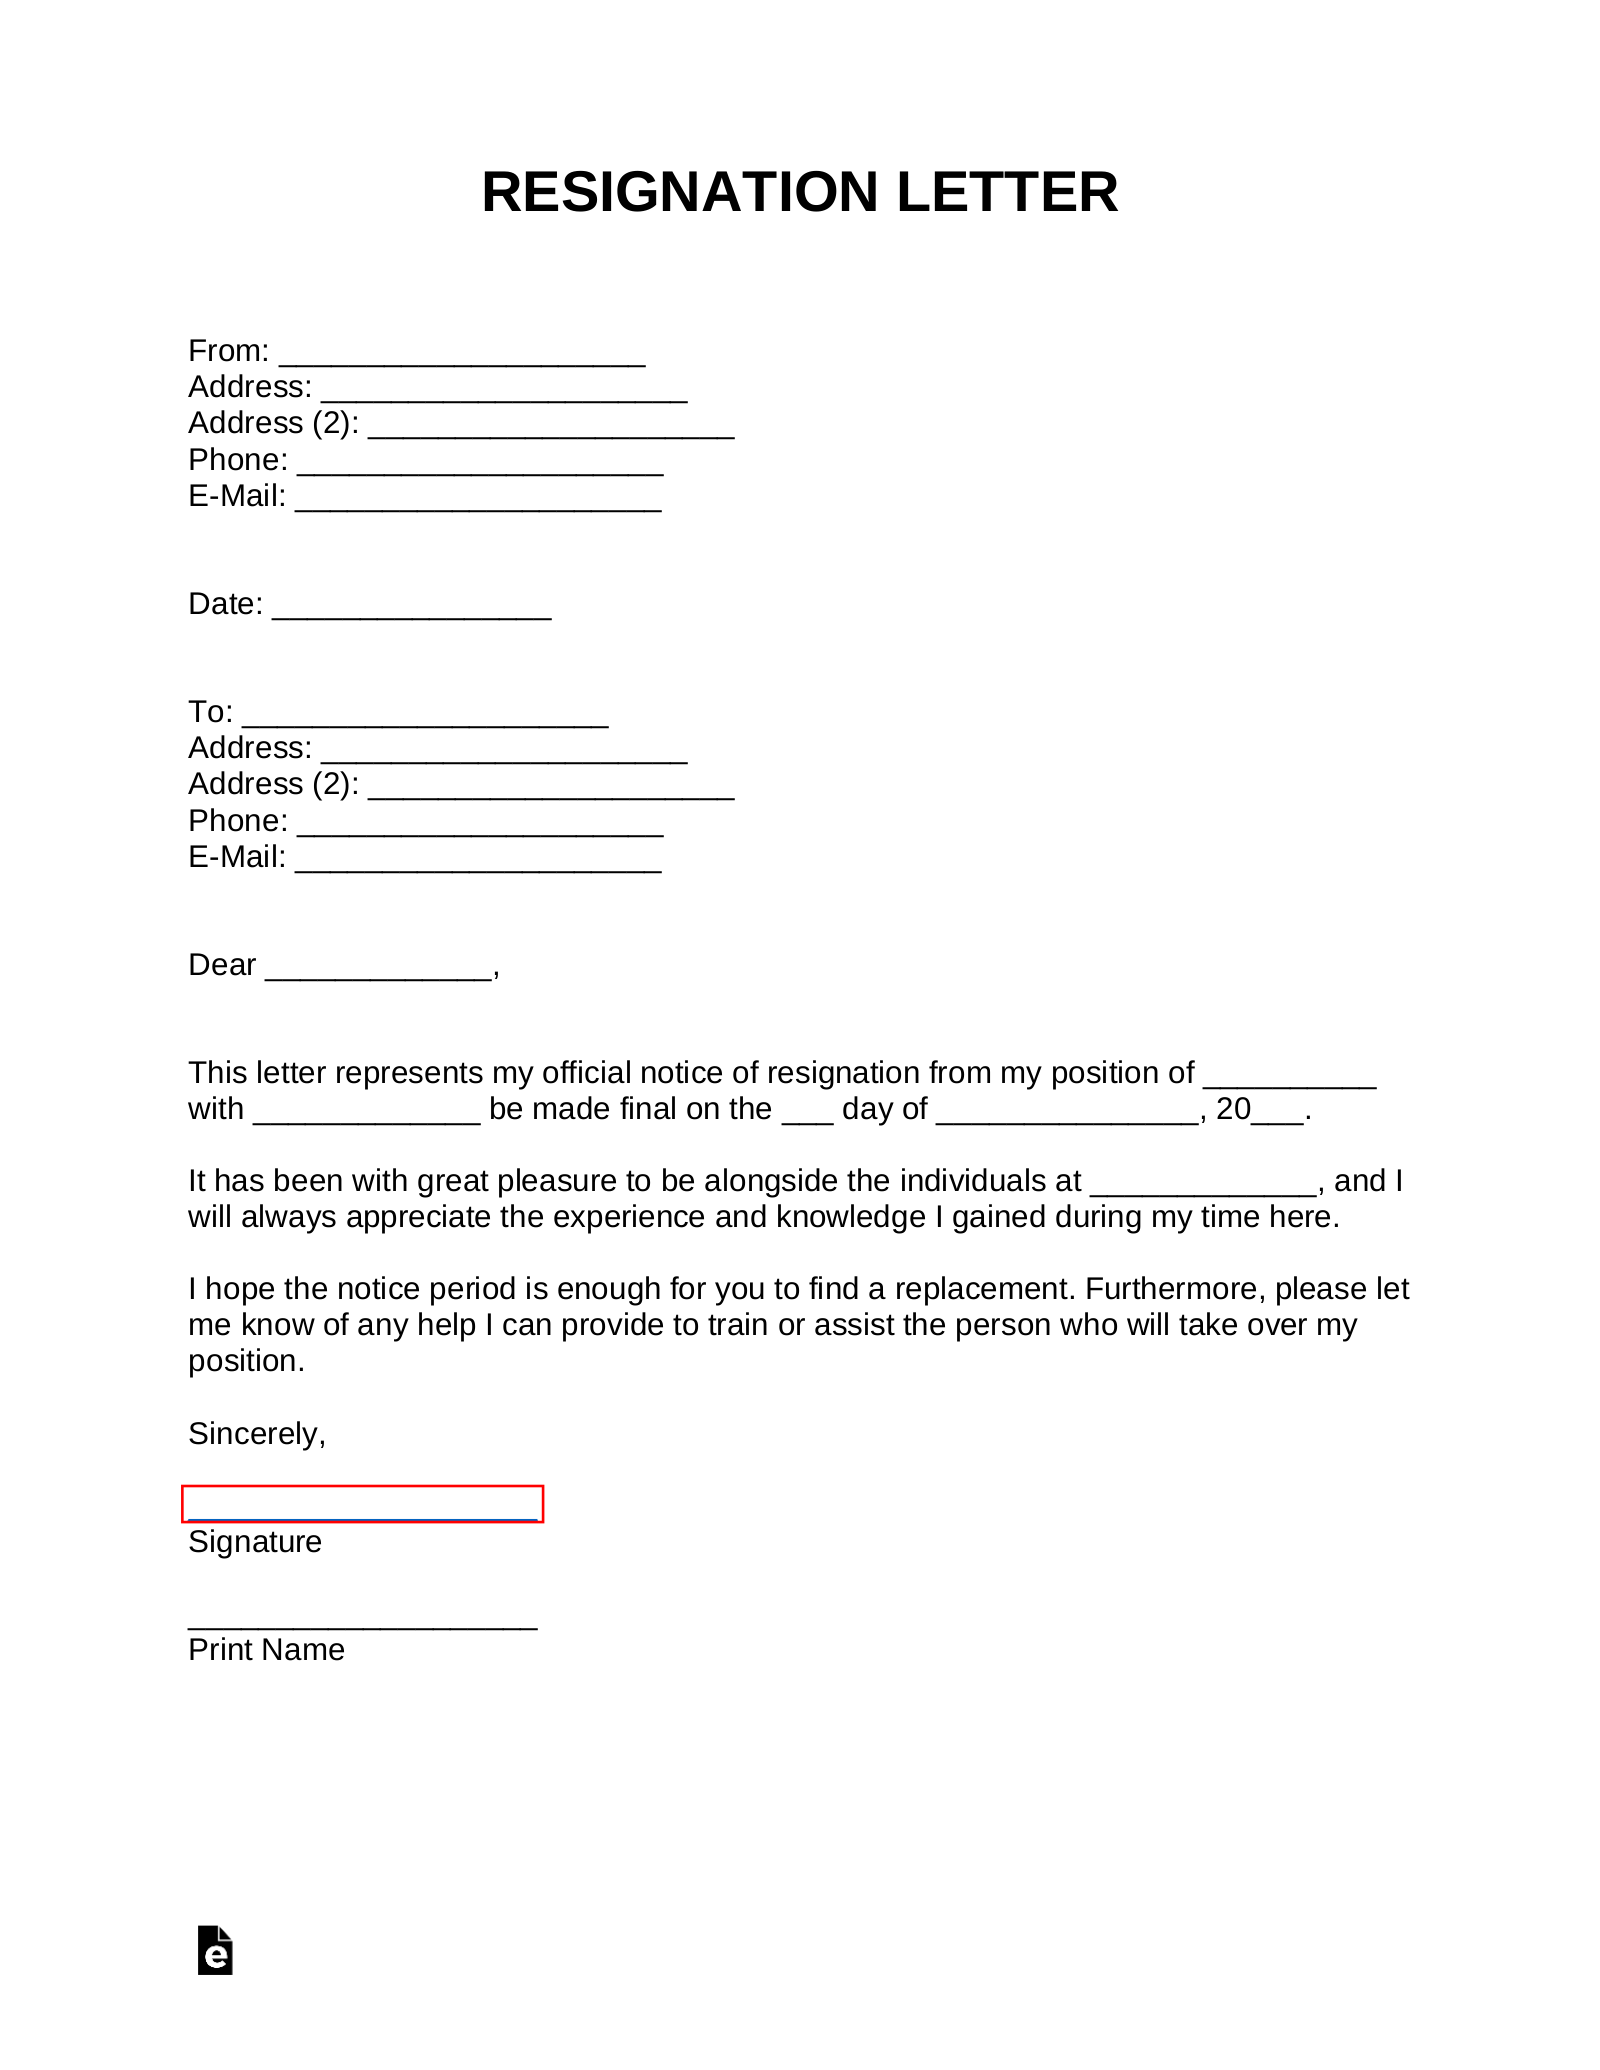 Formats Of Resignation Letter from eforms.com